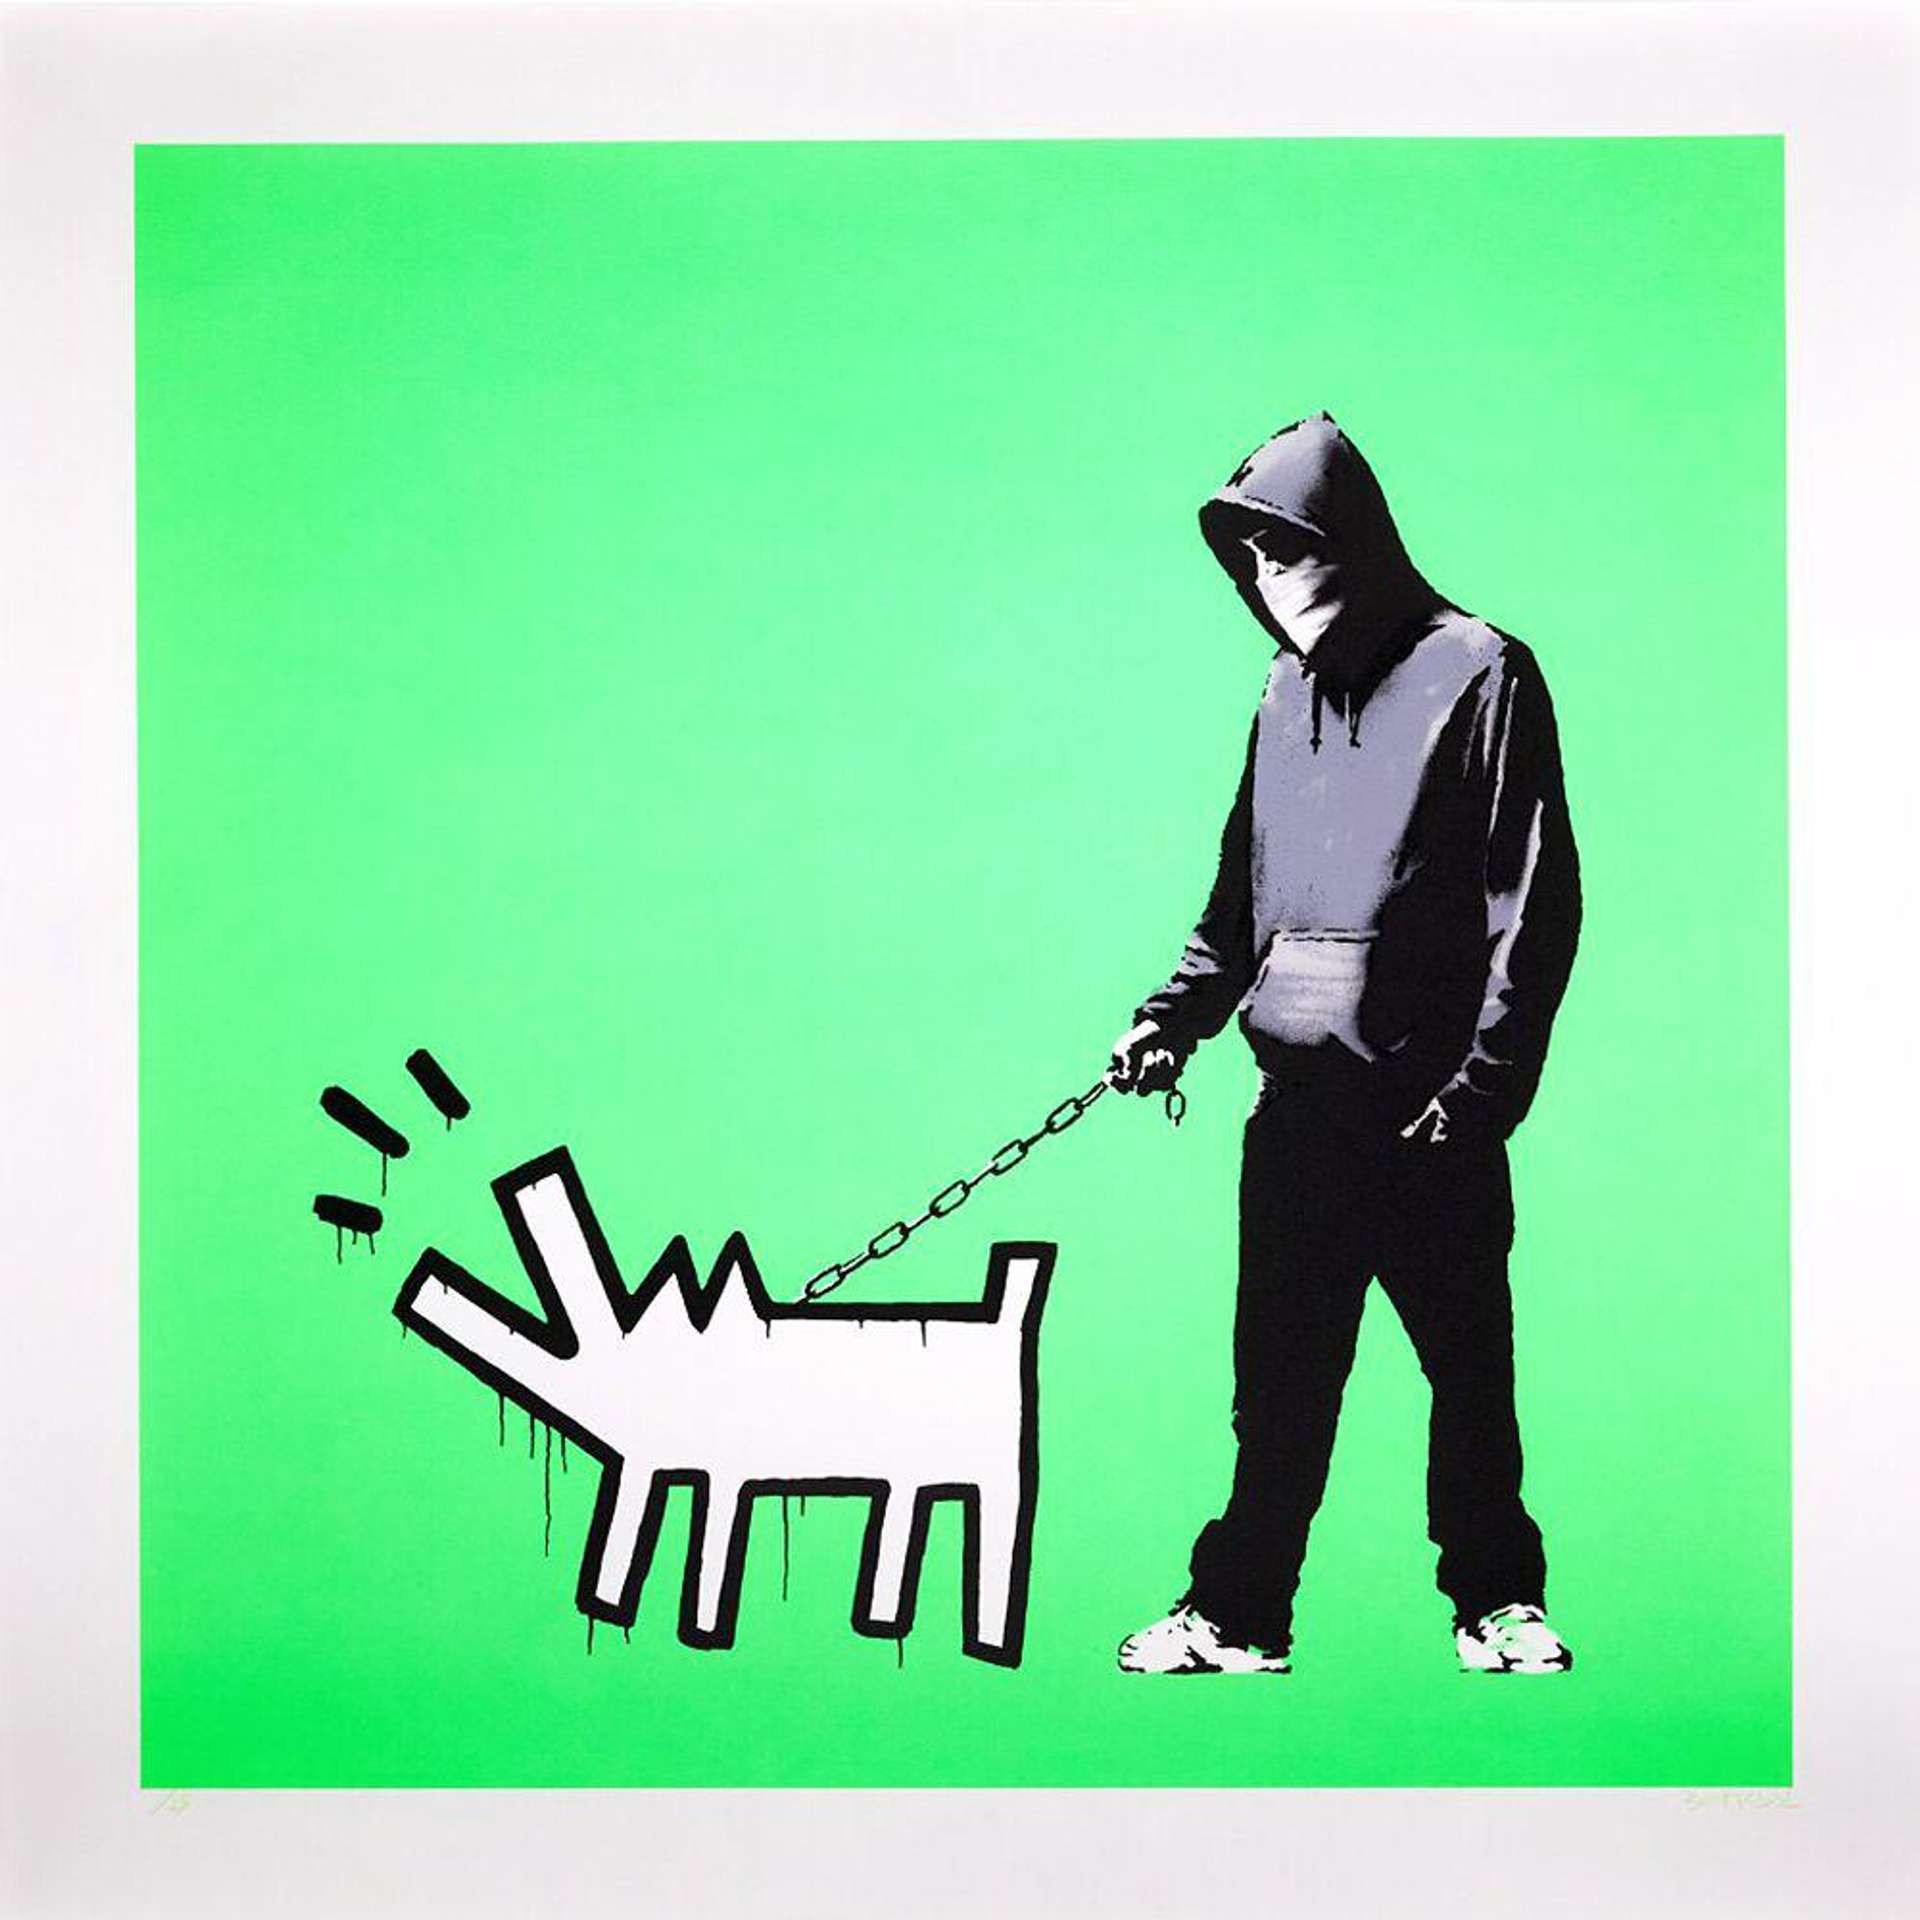 A screenprint by Banksy depicting an homage to Keith Haring's iconic Barking Dog, held by a hooded man against a neon green background.